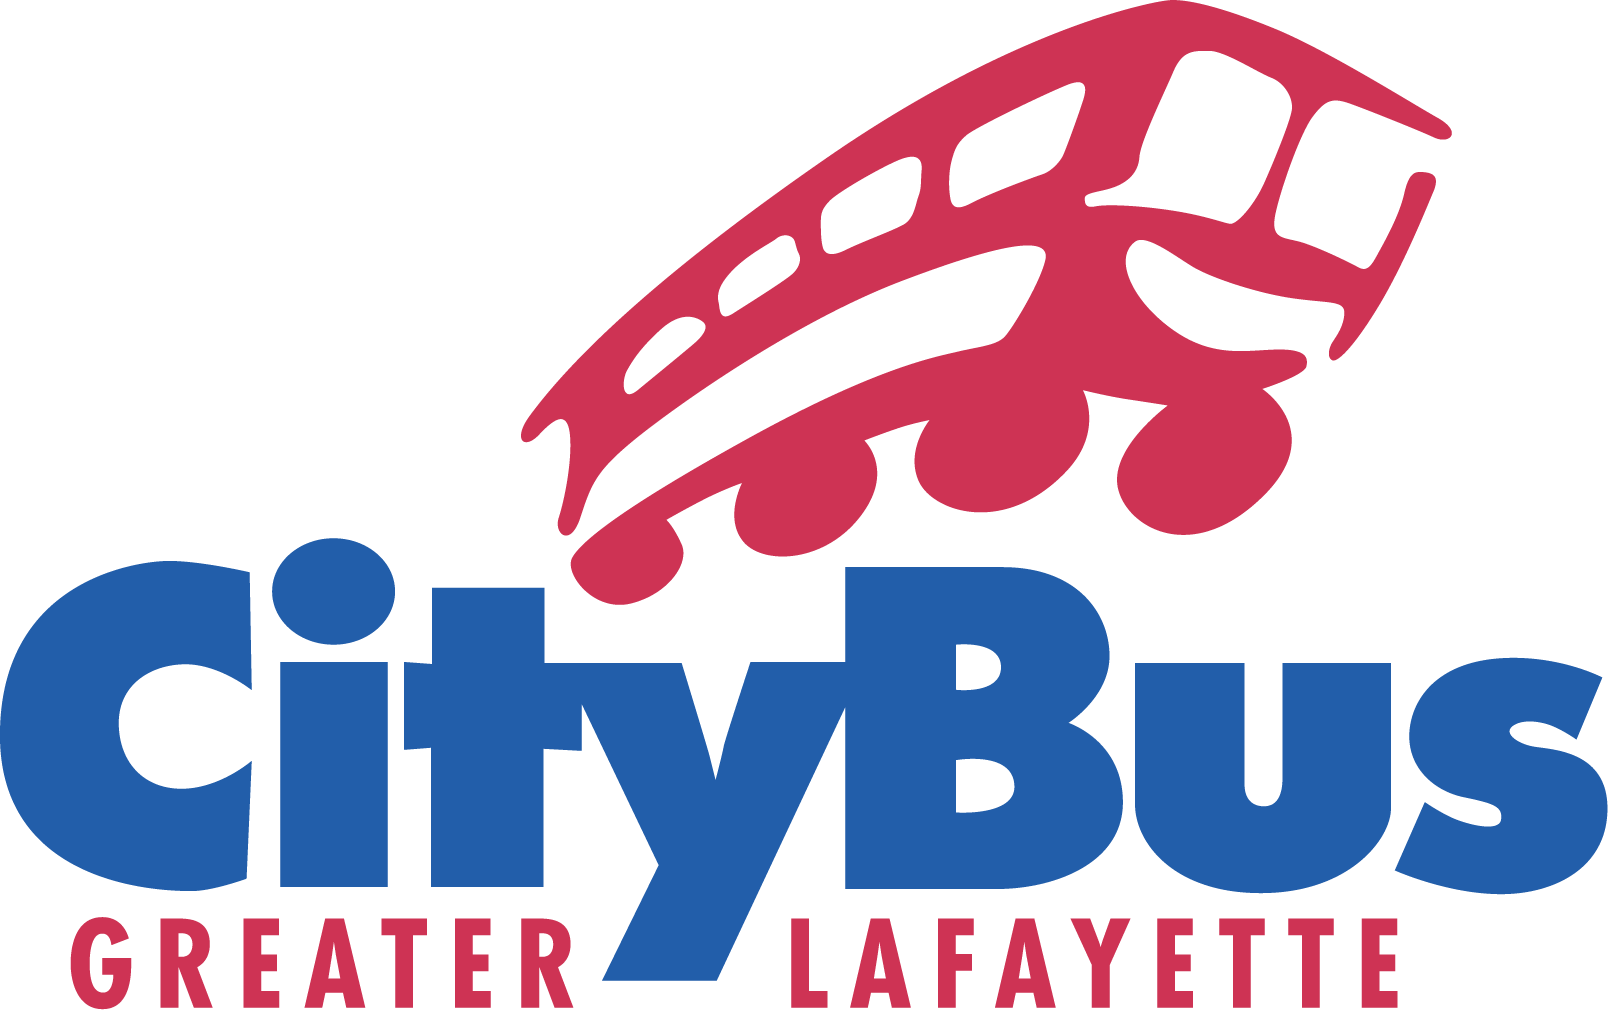 Stay up to date with MyCityBus app alerts!